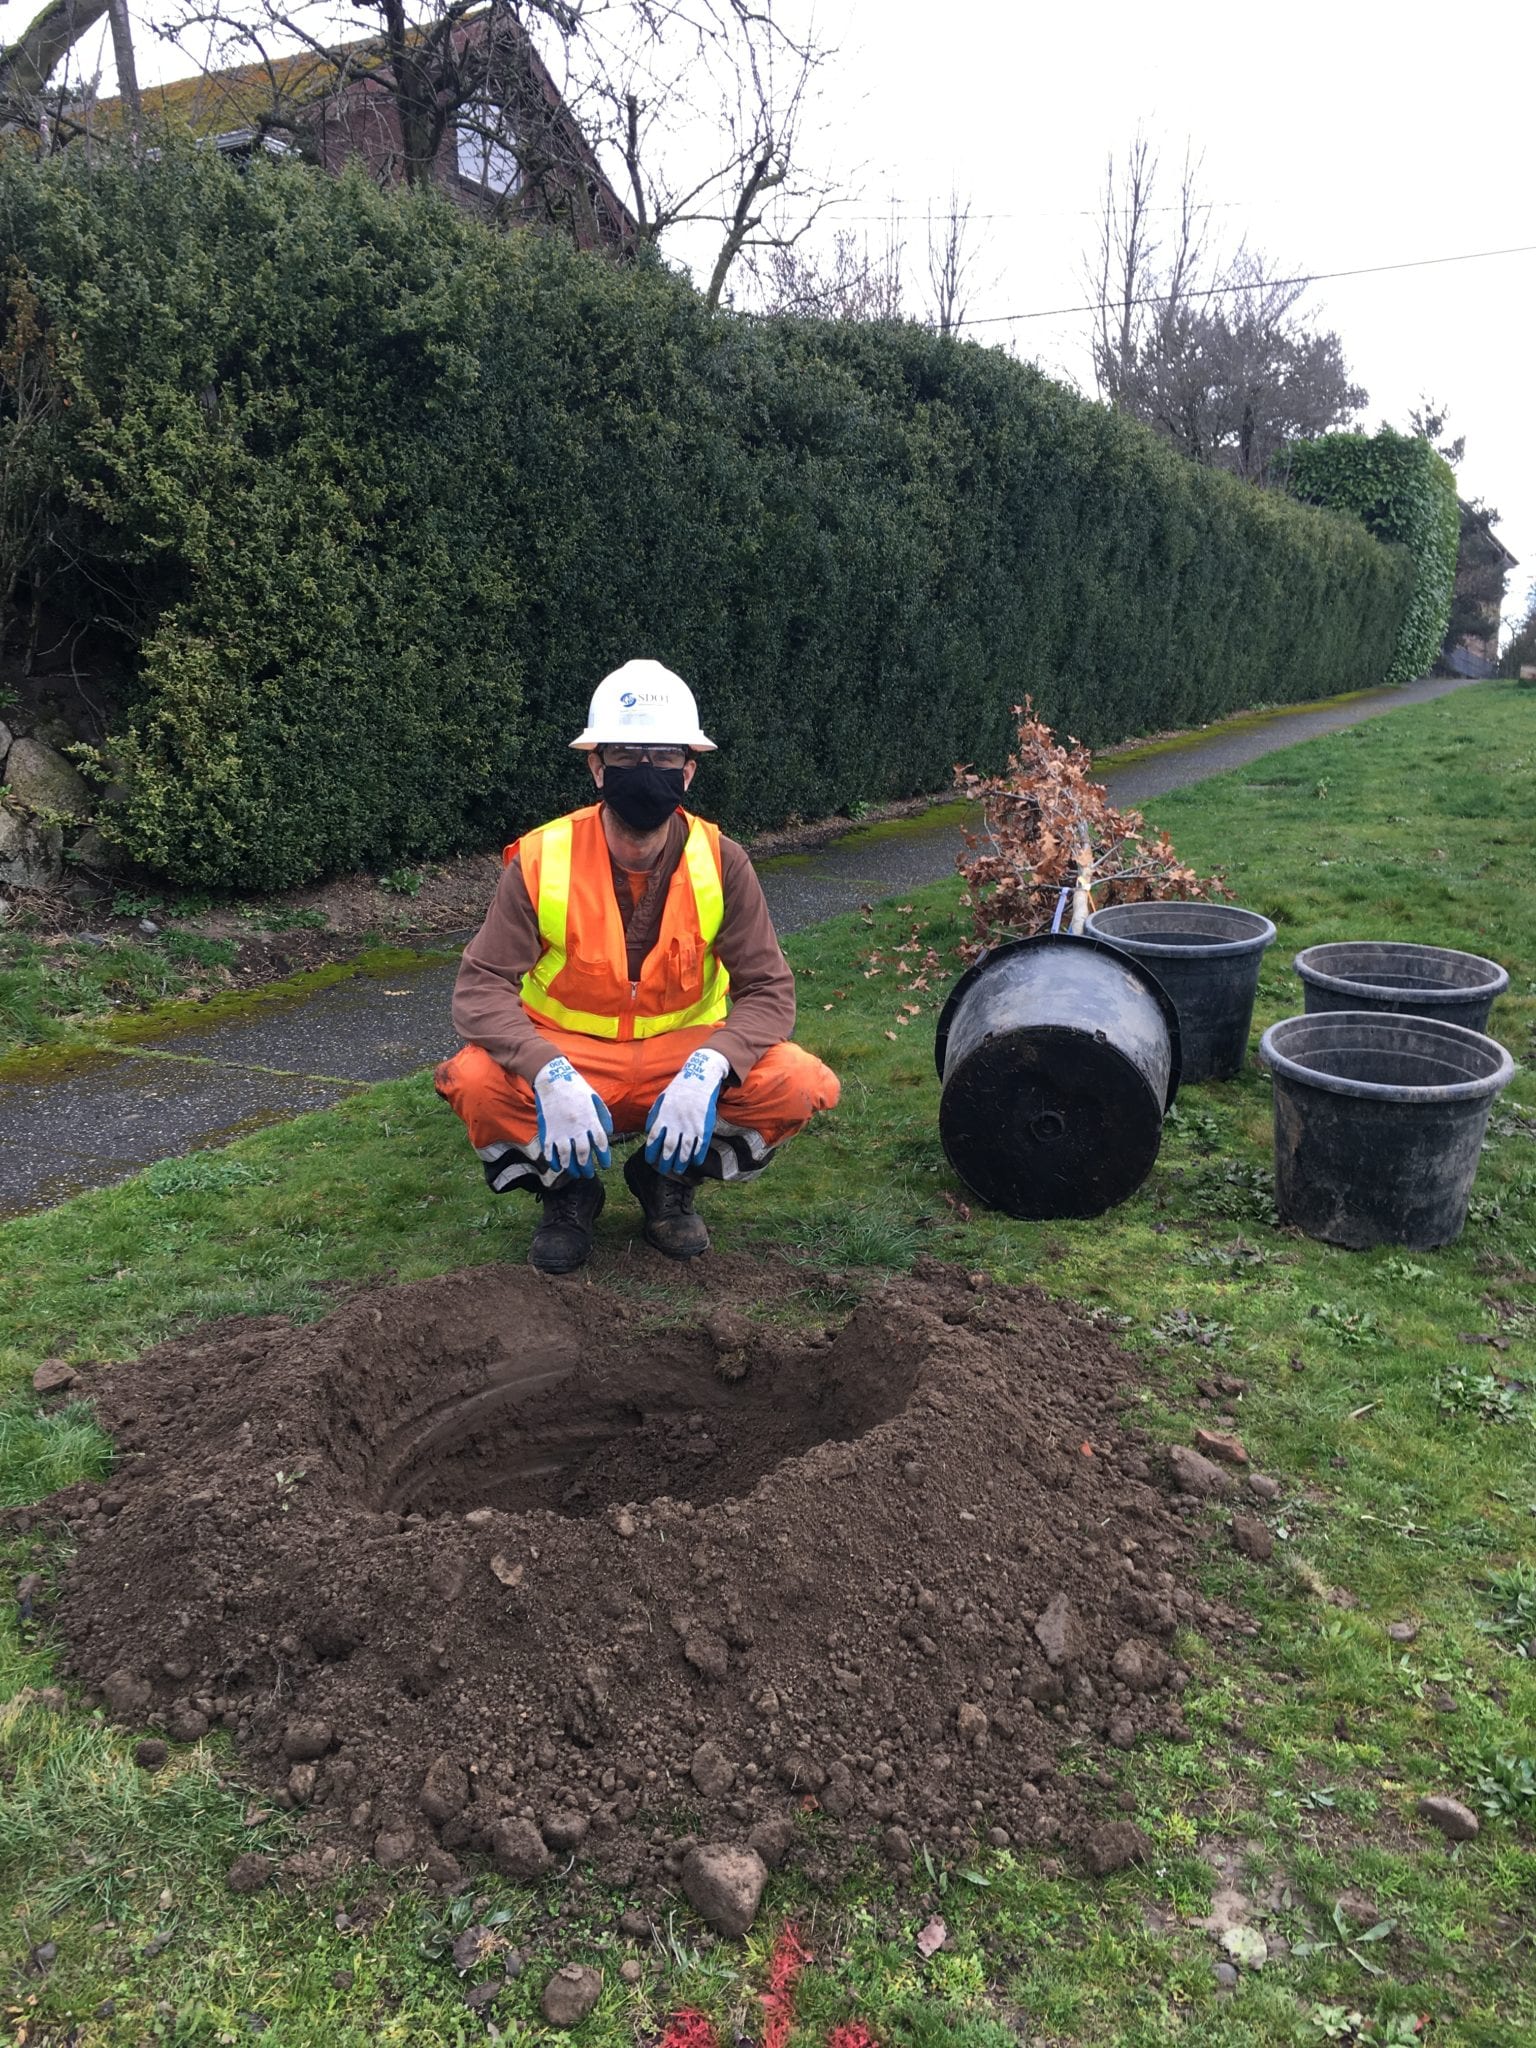 SDOT crew member gets ready to plant a new tree in South Park. Photo: Sherry Graham